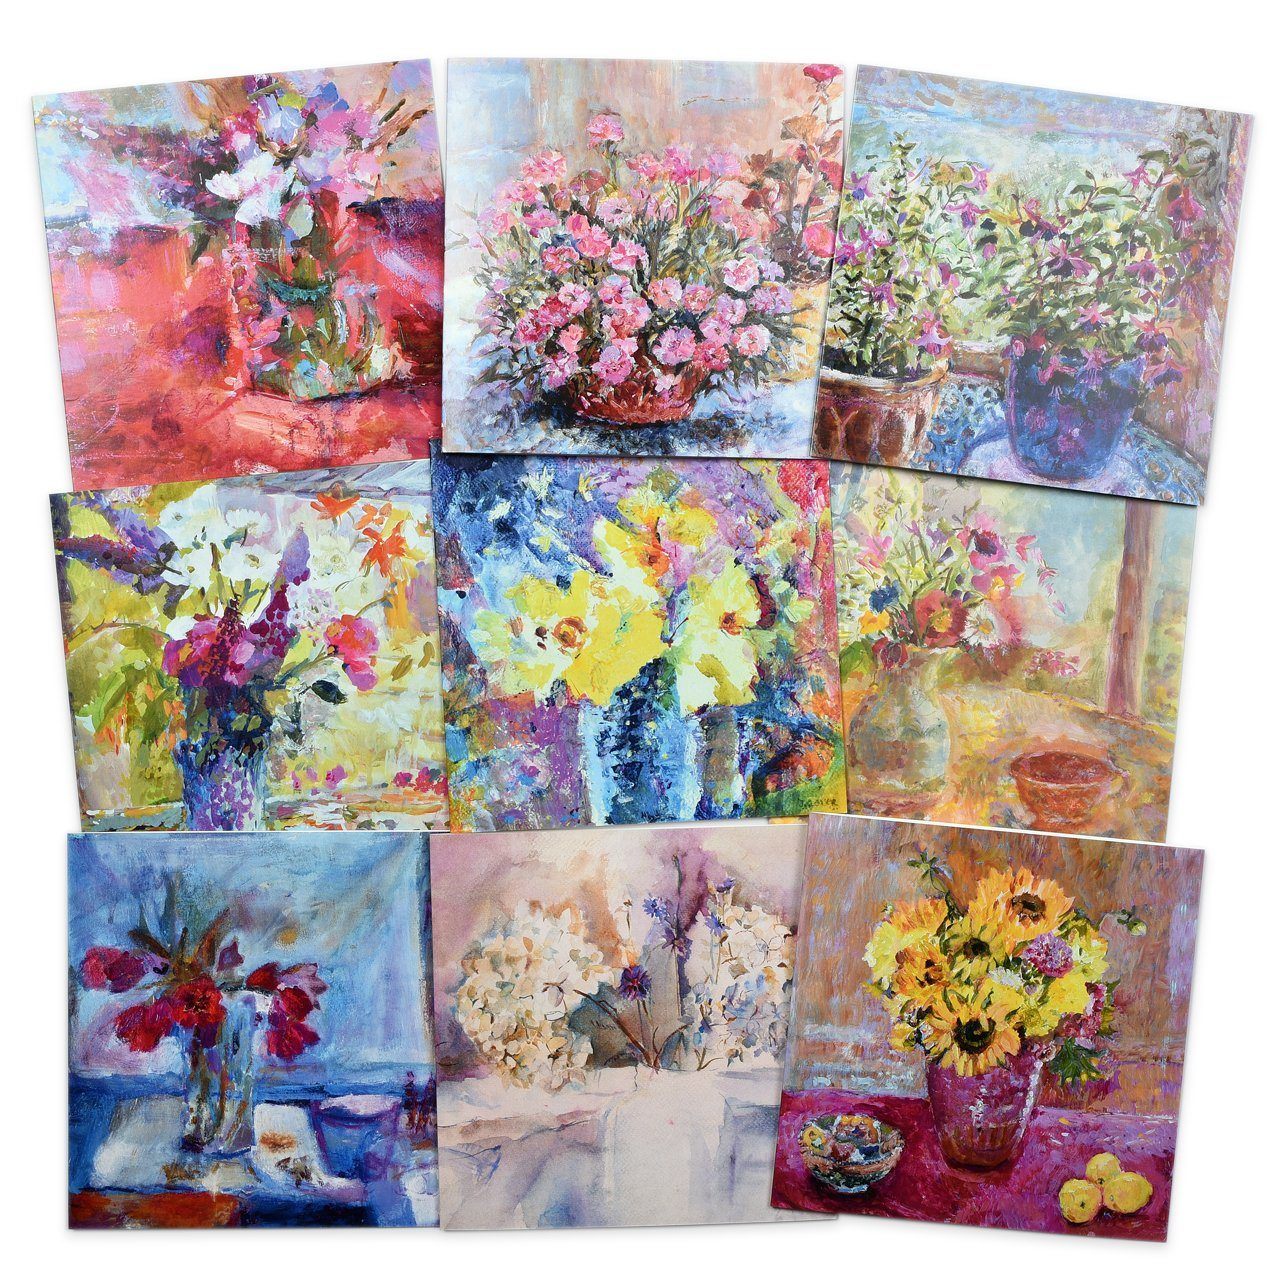 Floral Cards made from beautiful flower paintings at www.judigloverart.com. The colourful flower greeting cards are for all occasions and available as individual blank cards or packs of greeting cards